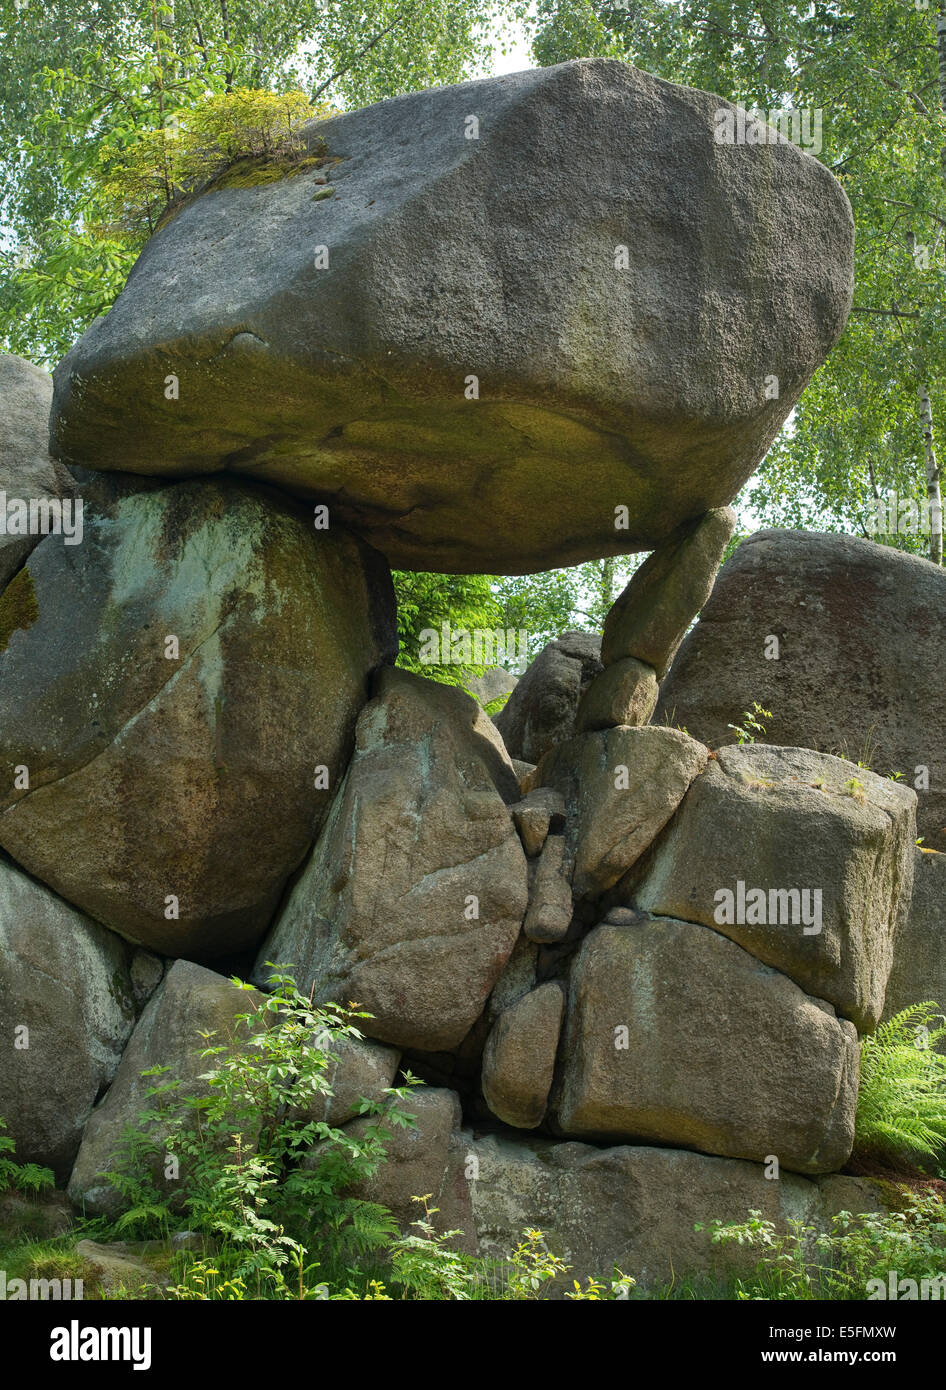 Mausefalle or mousetrap rock formation, near Goslar, Harz, Lower Saxony, Germany Stock Photo